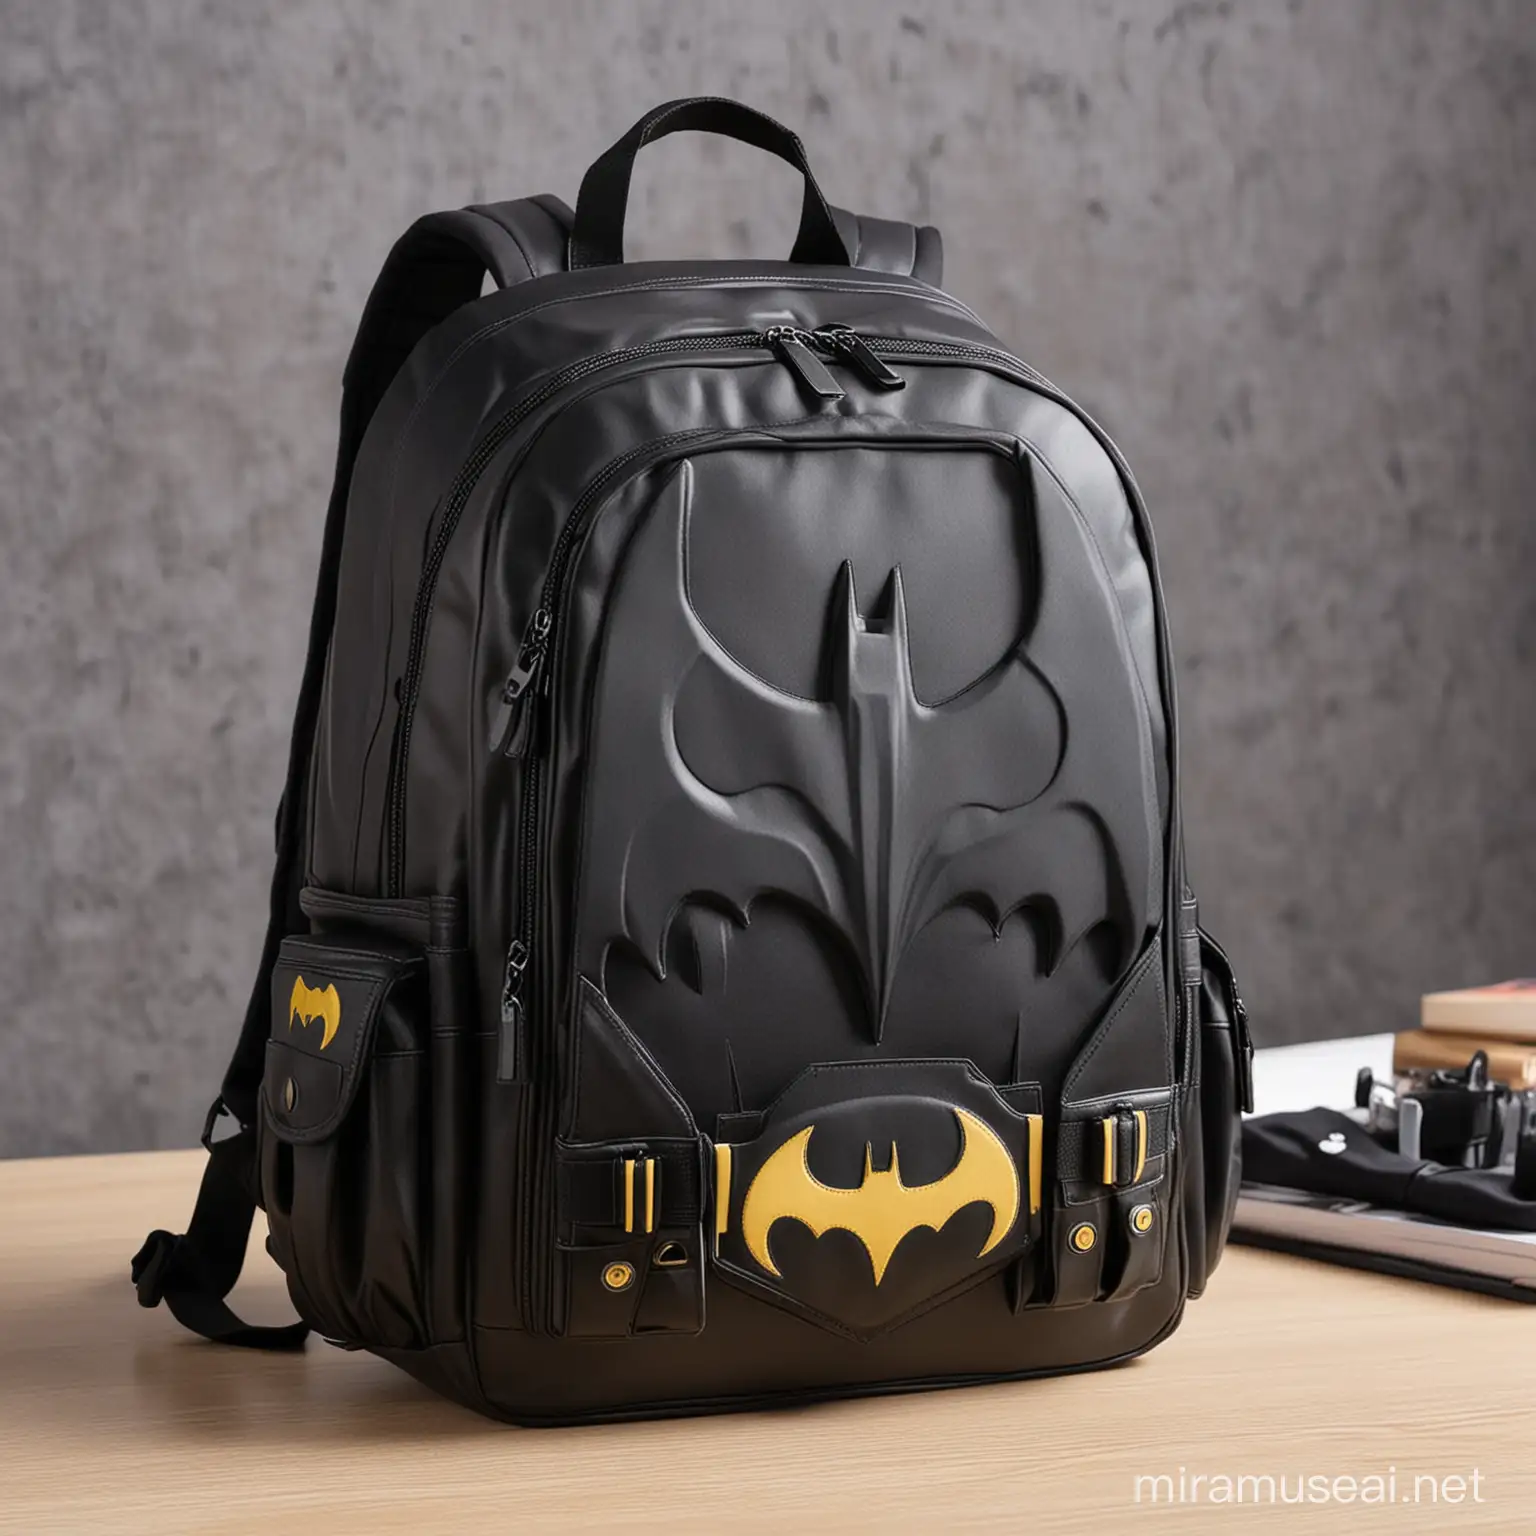 Batman Style Backpack On The Table